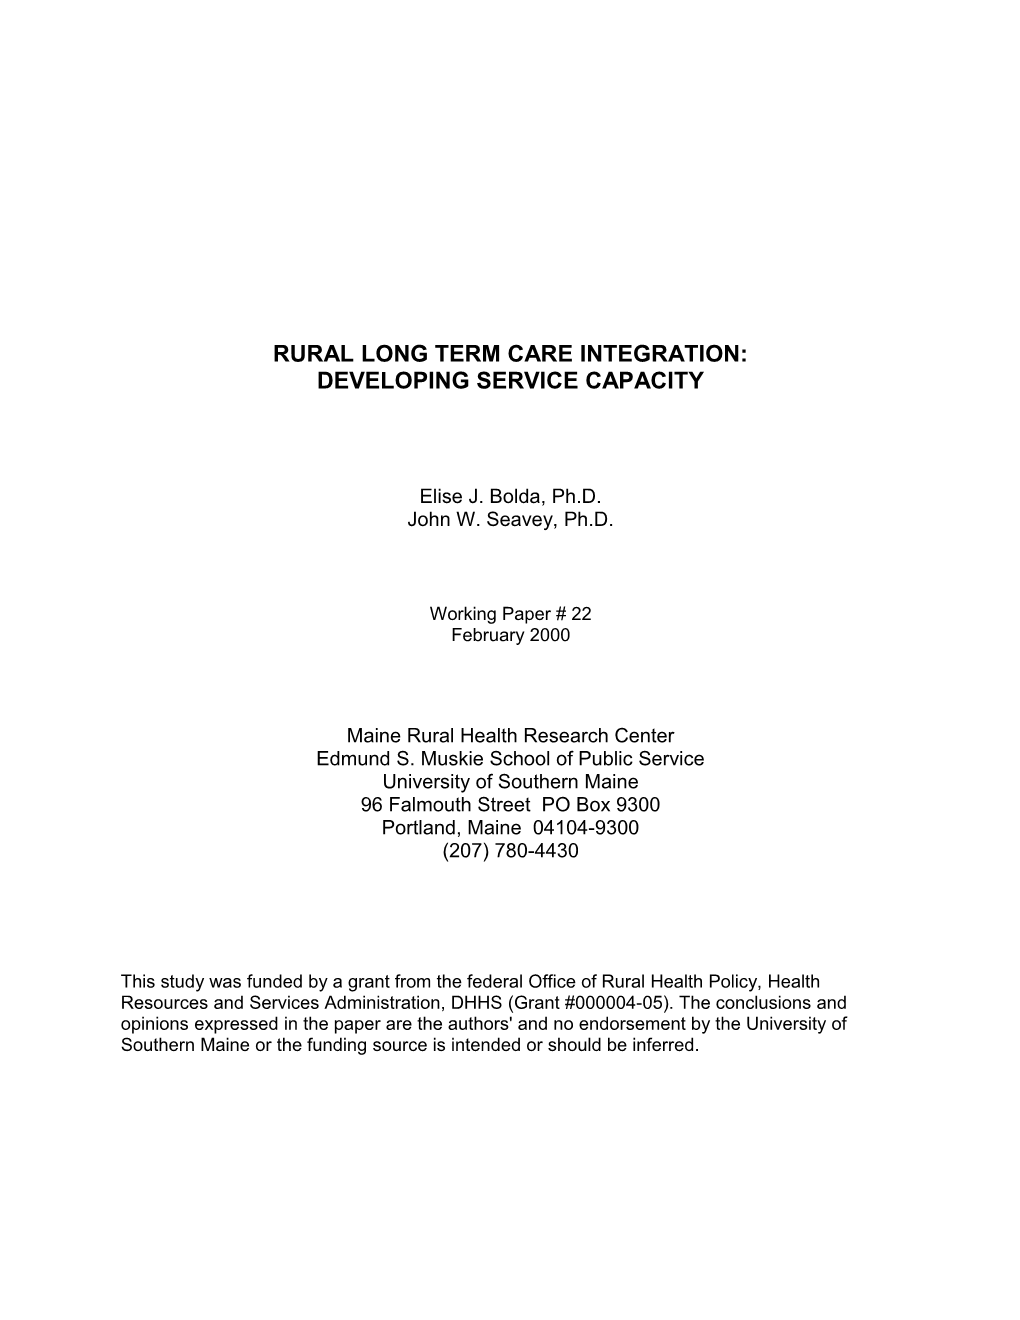 Developing Rural Long Term Care Service Capacity